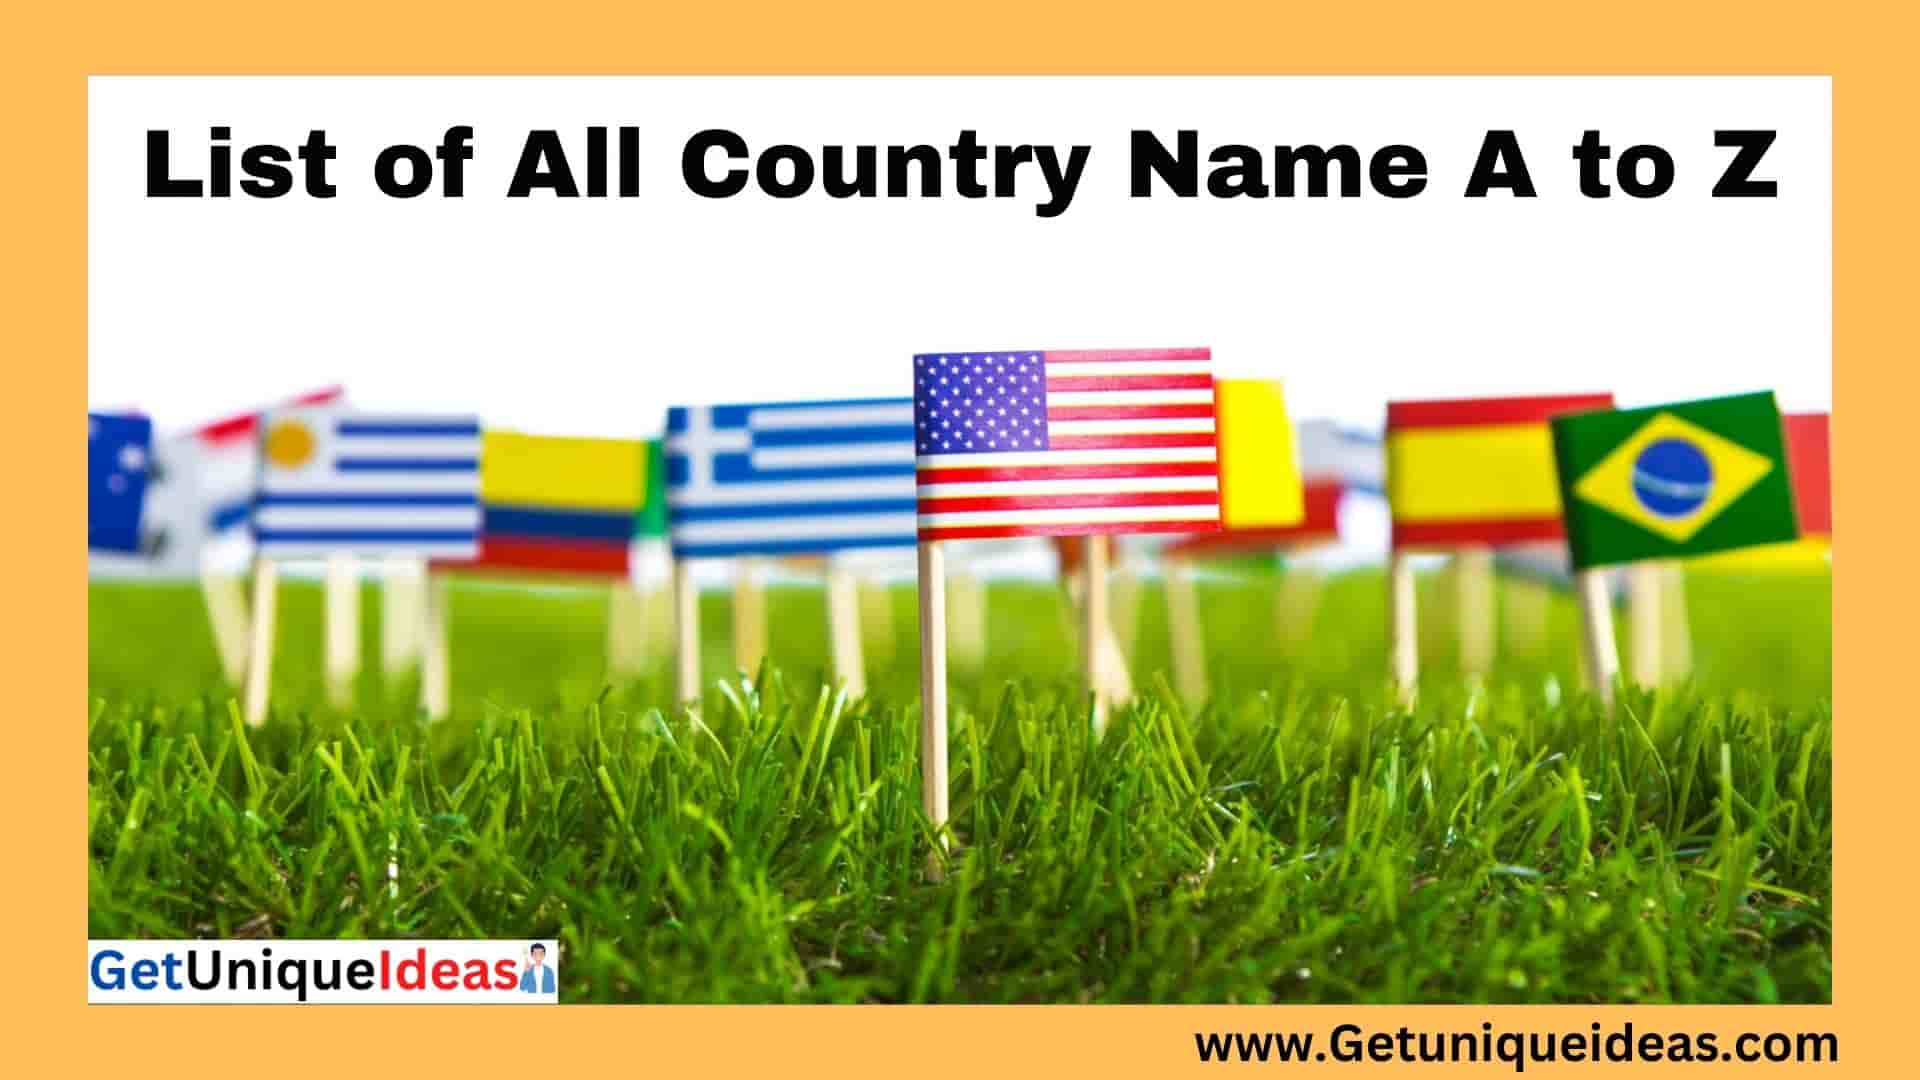 List of all countries name A to Z